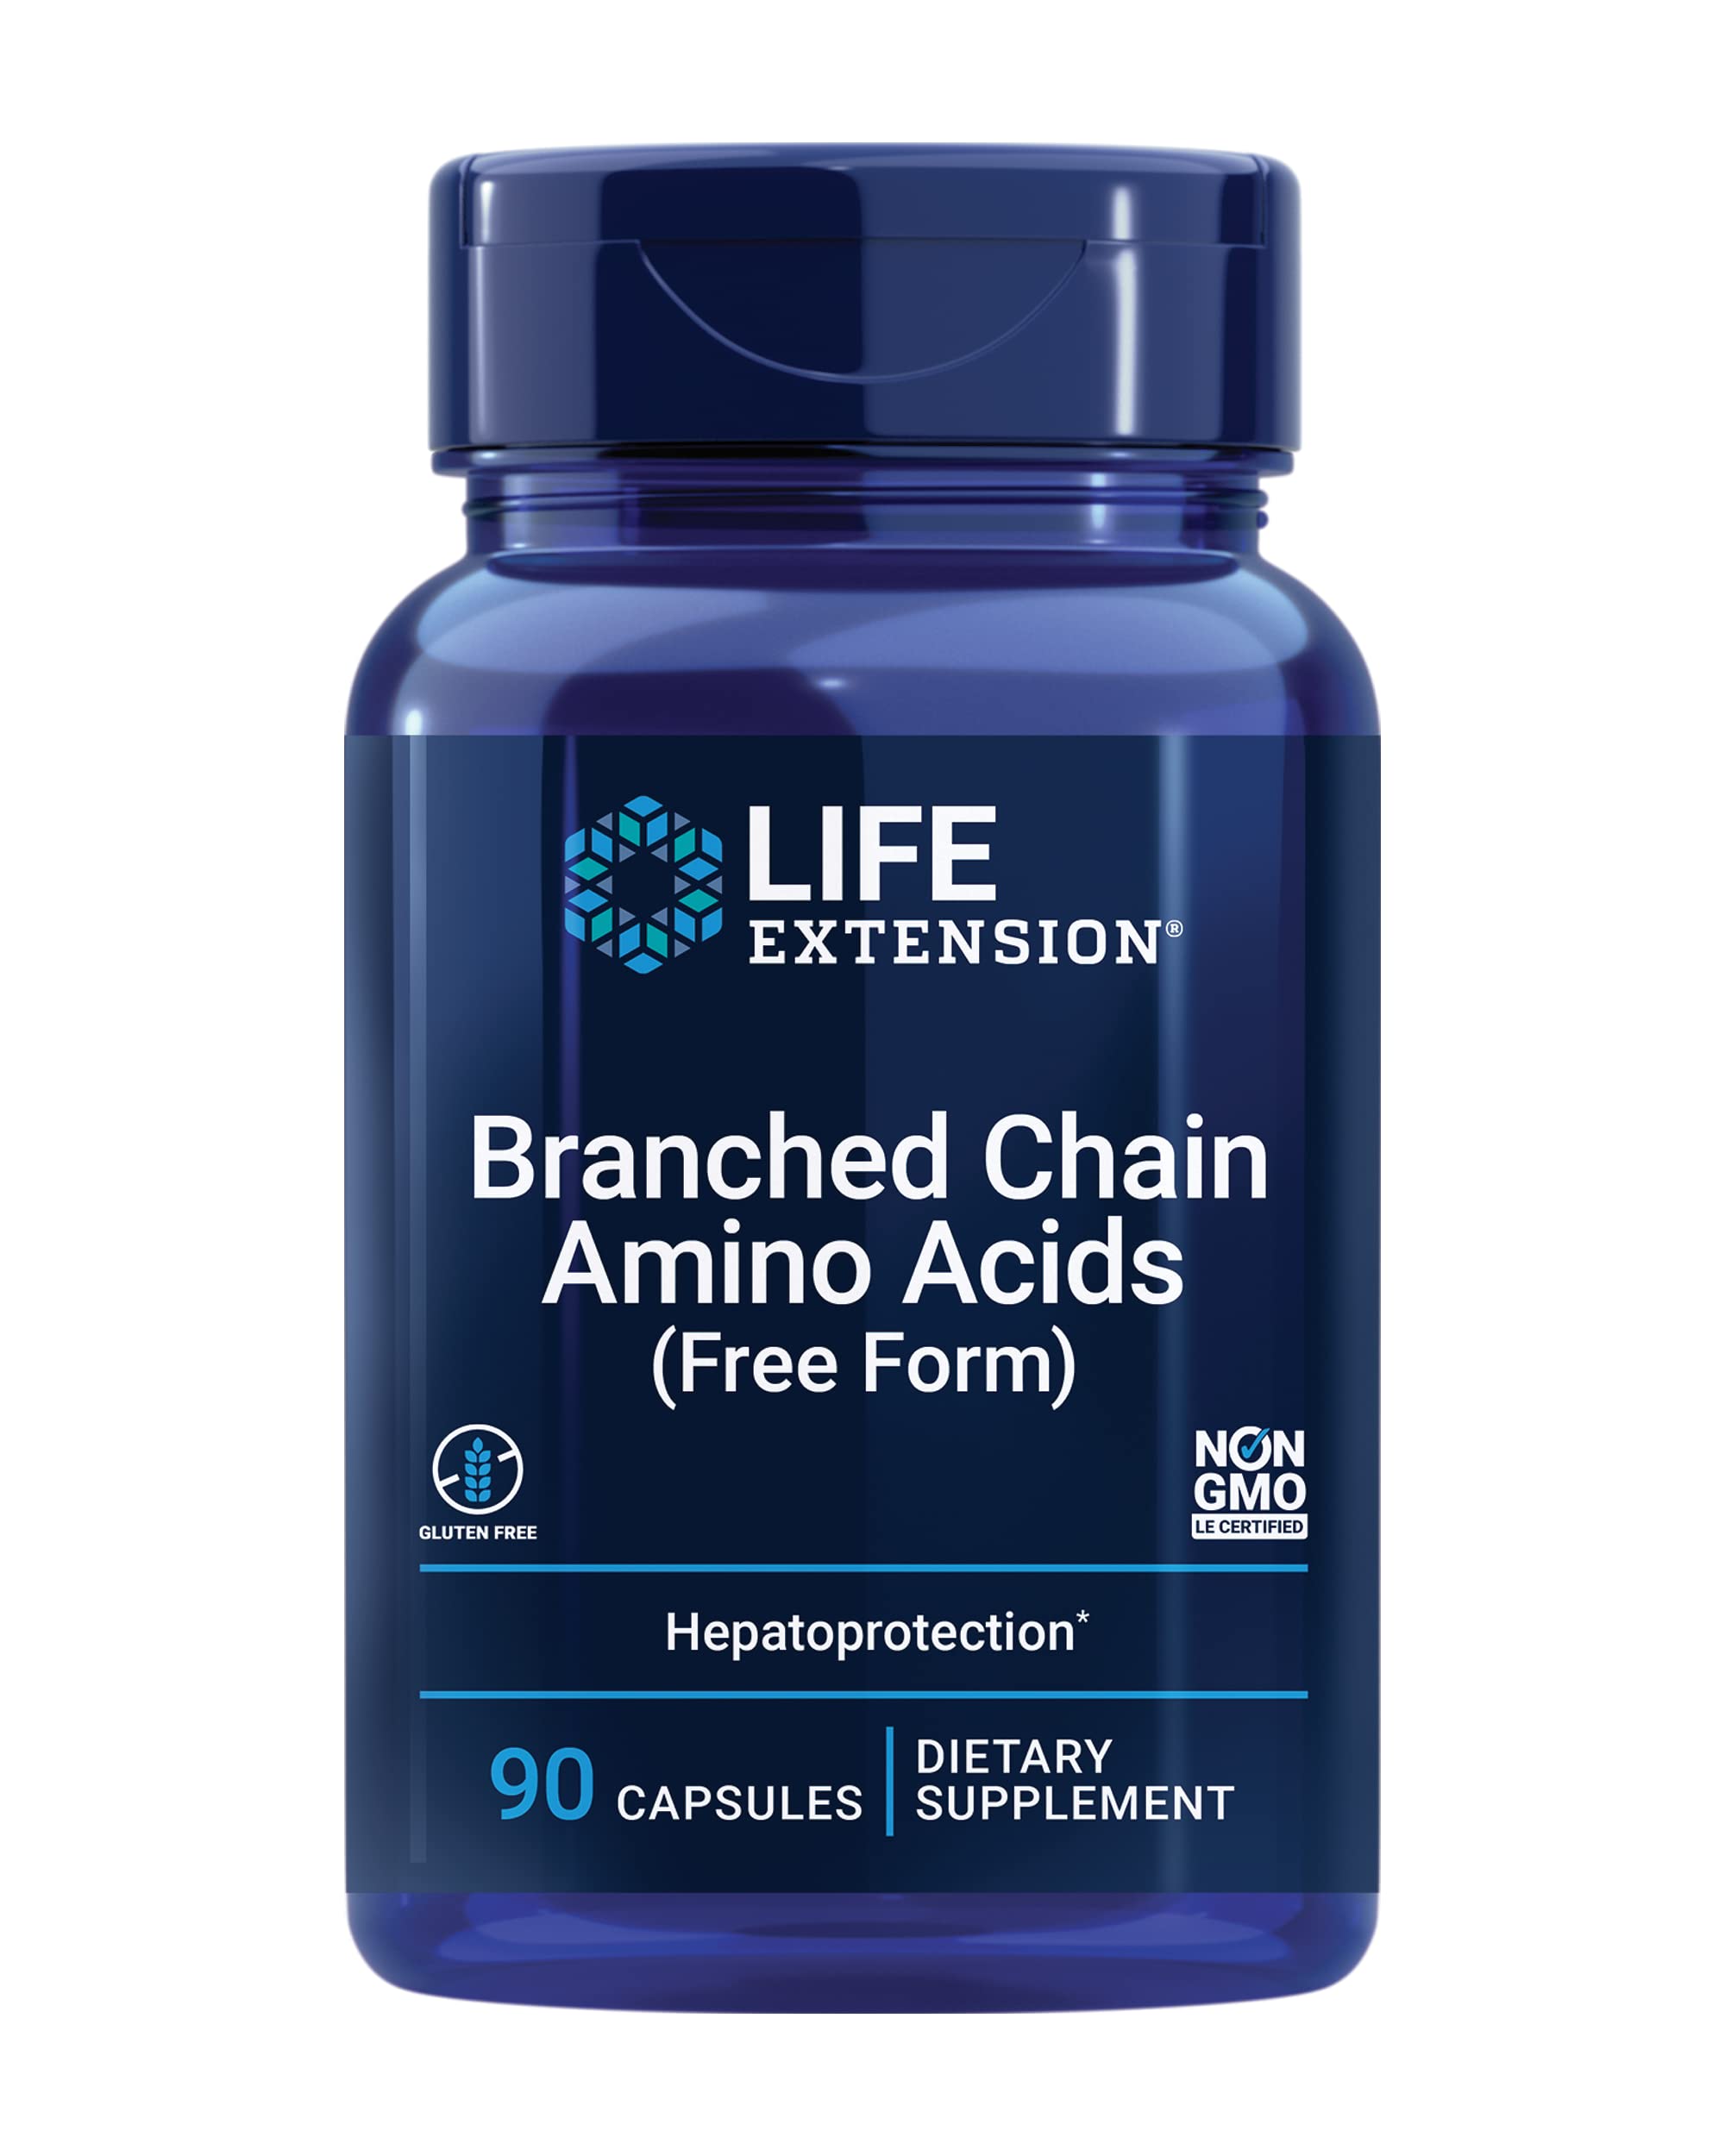 Life Extension Branched Chain Amino Acids - BCAA Supplement - Essential Nutrition L-Leucine, L-Isoleucine, L-Valine for Muscle Recovery Support after Workout - Gluten & GMO Free - 90 Capsules